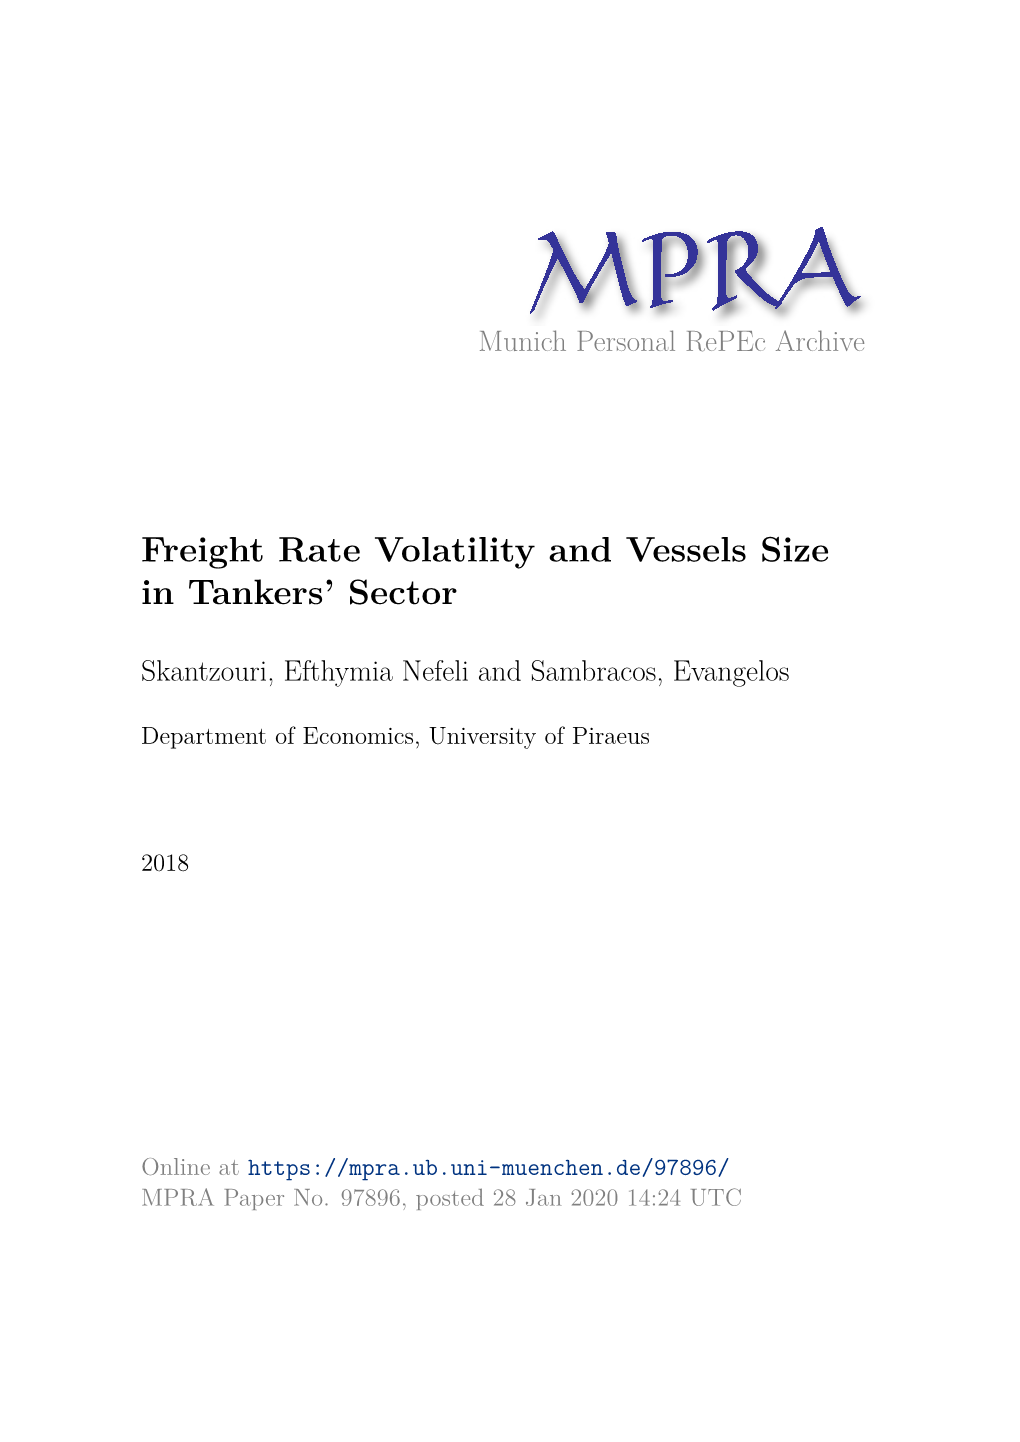 Freight Rate Volatility and Vessels Size in Tankers' Sector